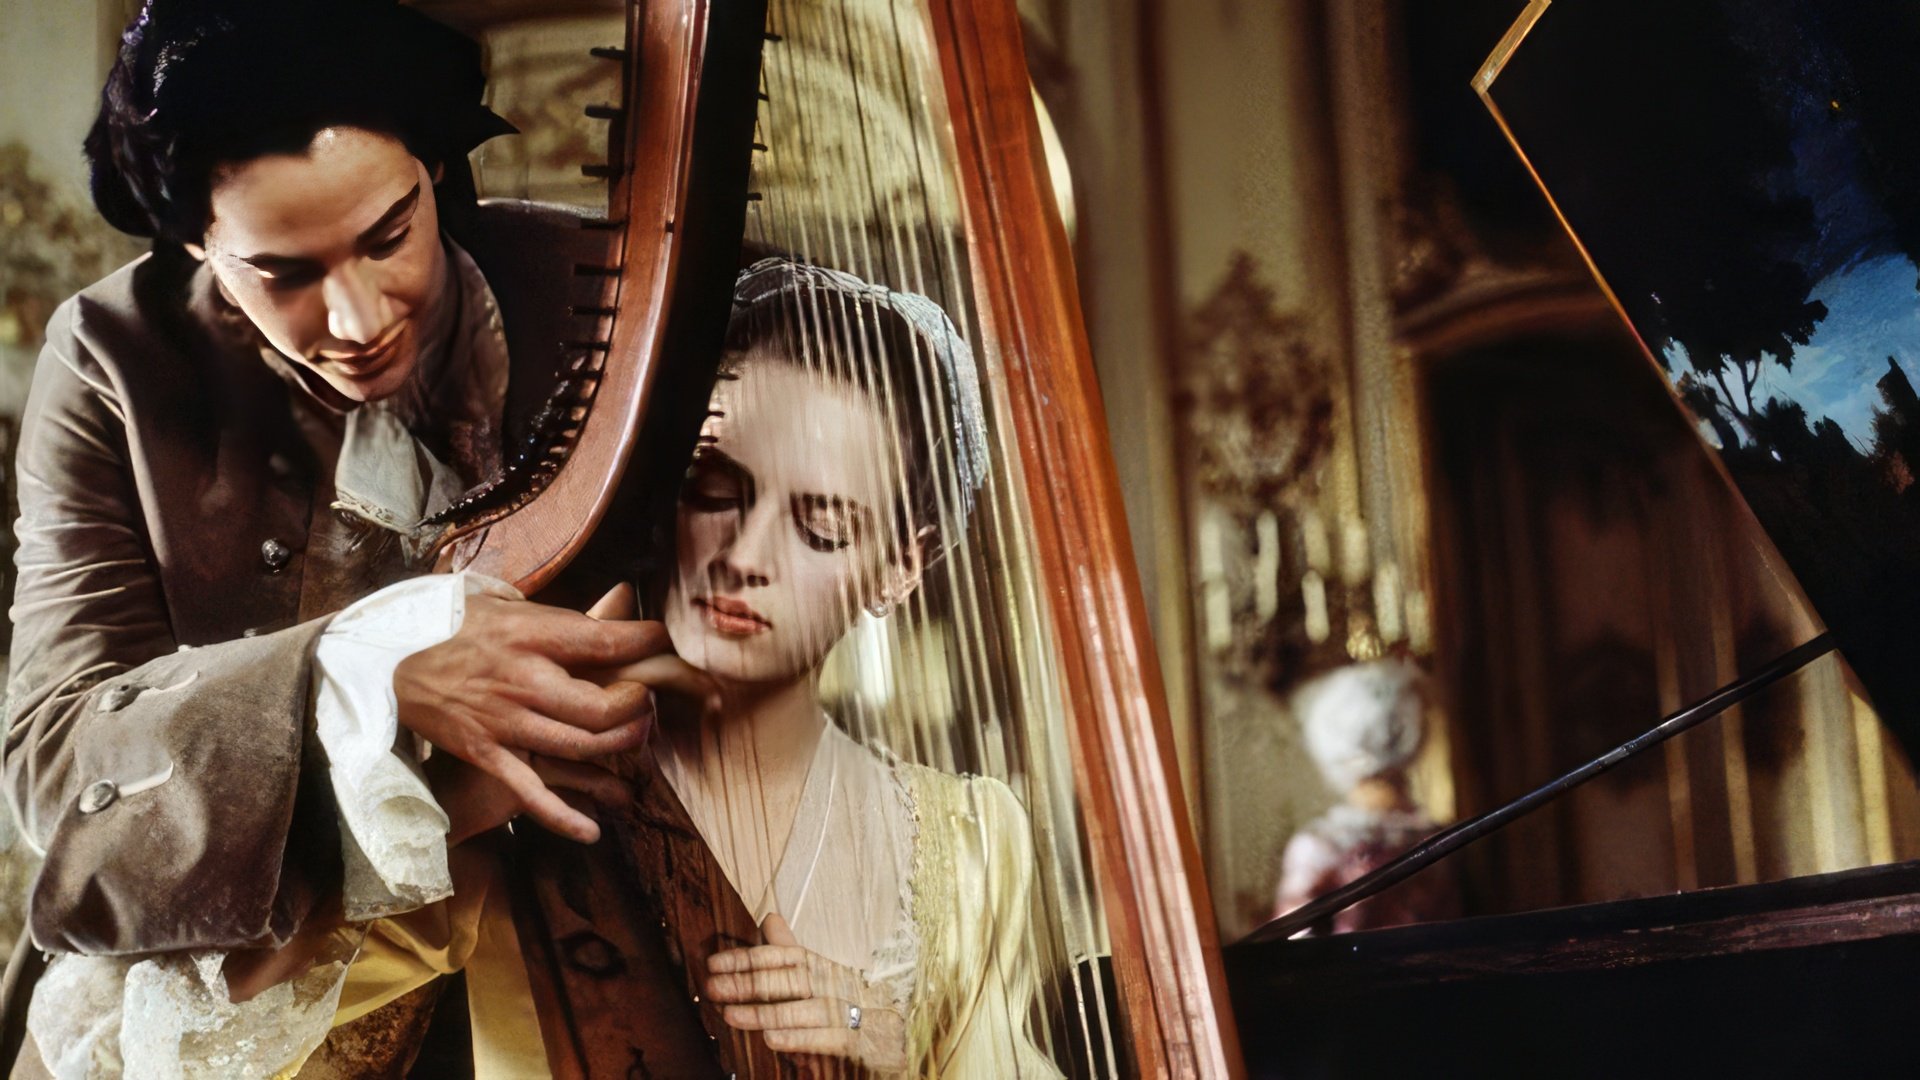 Uma and Keanu Reeves in a historical drama «Dangerous Liaisons»